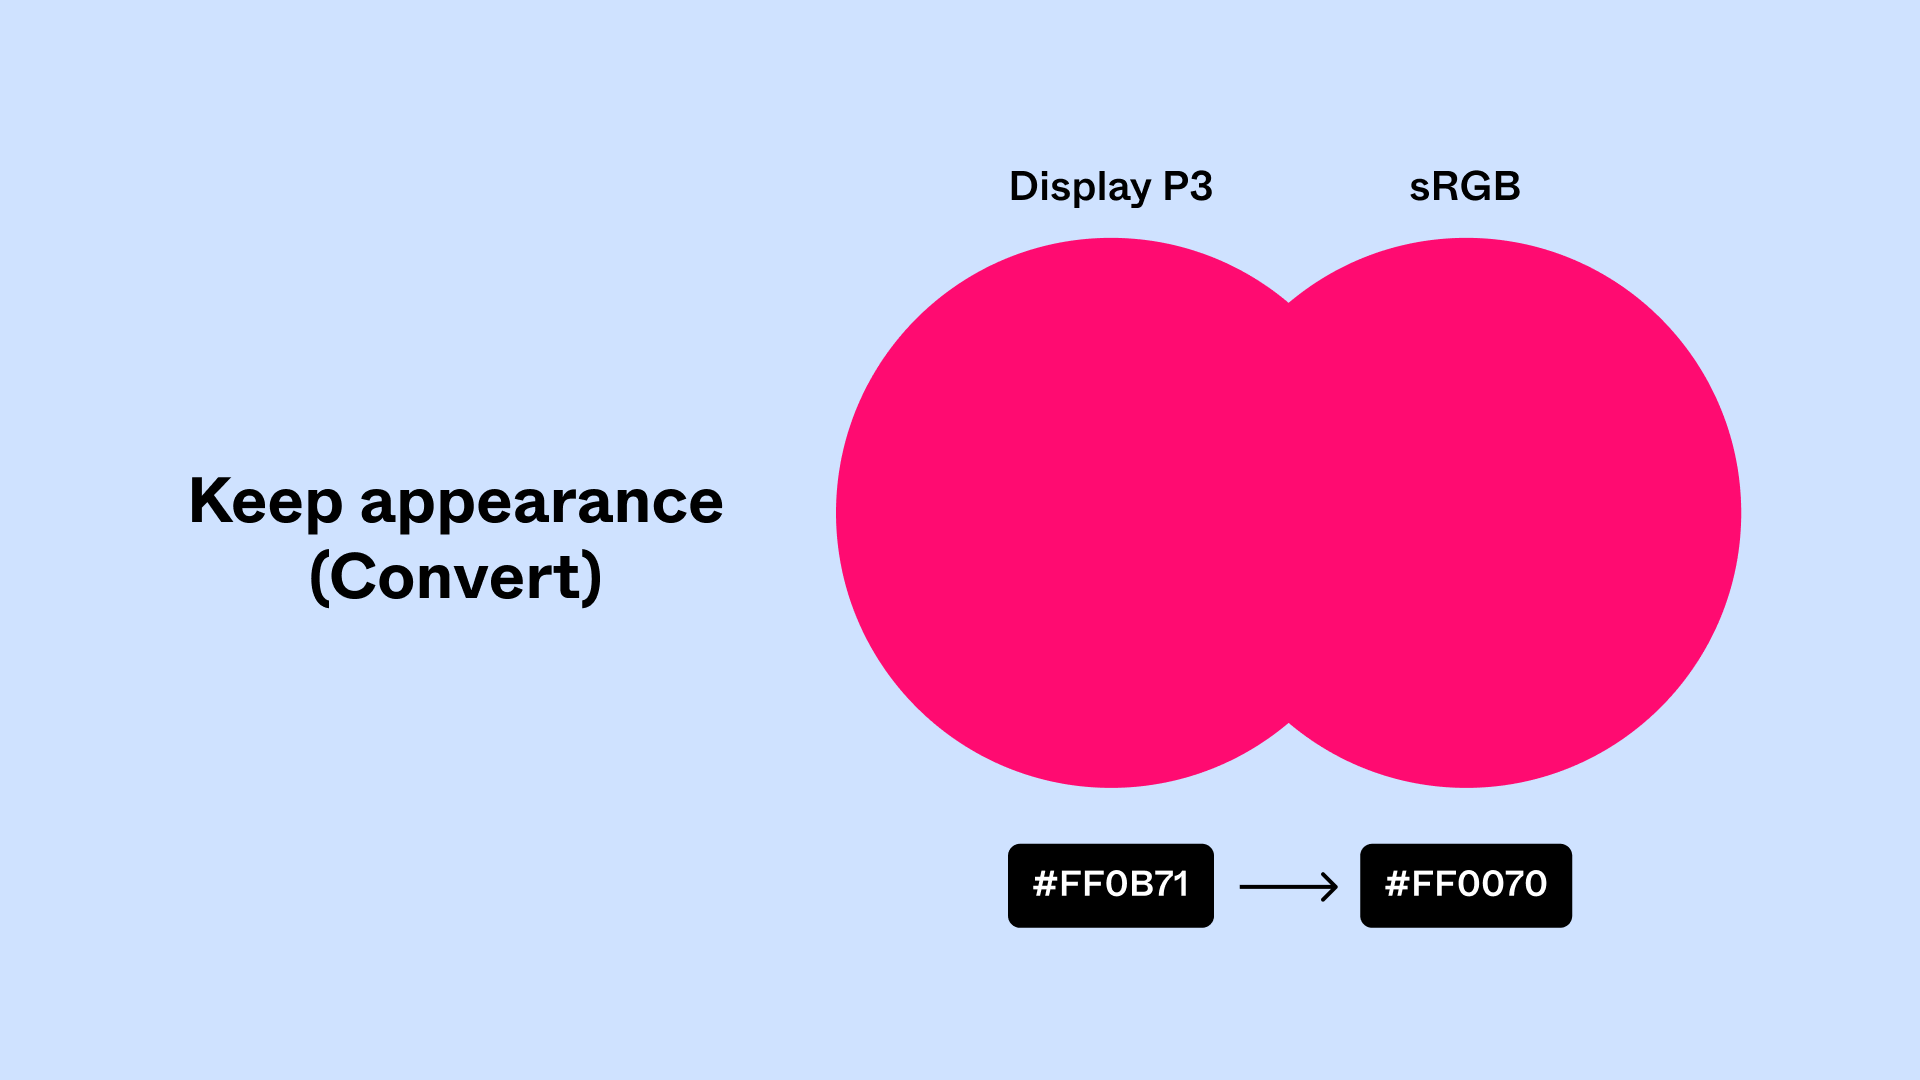 On the left is a title that says Keep appearance (Convert). On the right are two pink circles with the same color, one labelled Display P3 with hex code #FF0B71, one labelled sRGB with hex code #FF0070.